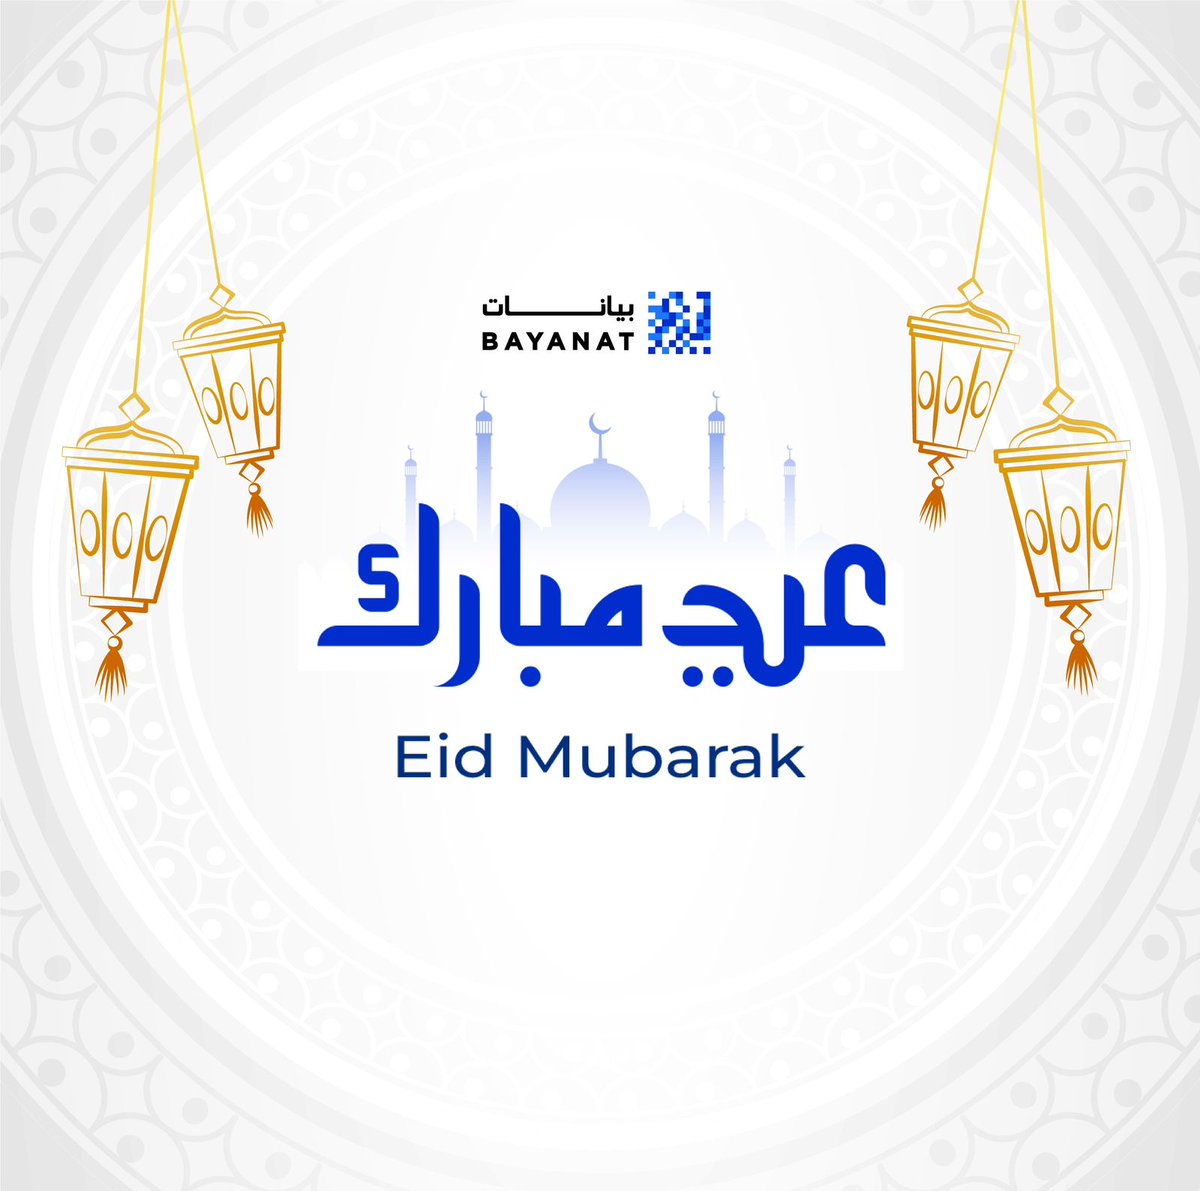 From all of us at Bayanat, we wish you and your family a happy Eid! May this special day bring you peace, happiness and prosperity. #EidMubarak #EidAlFitr #Bayanat